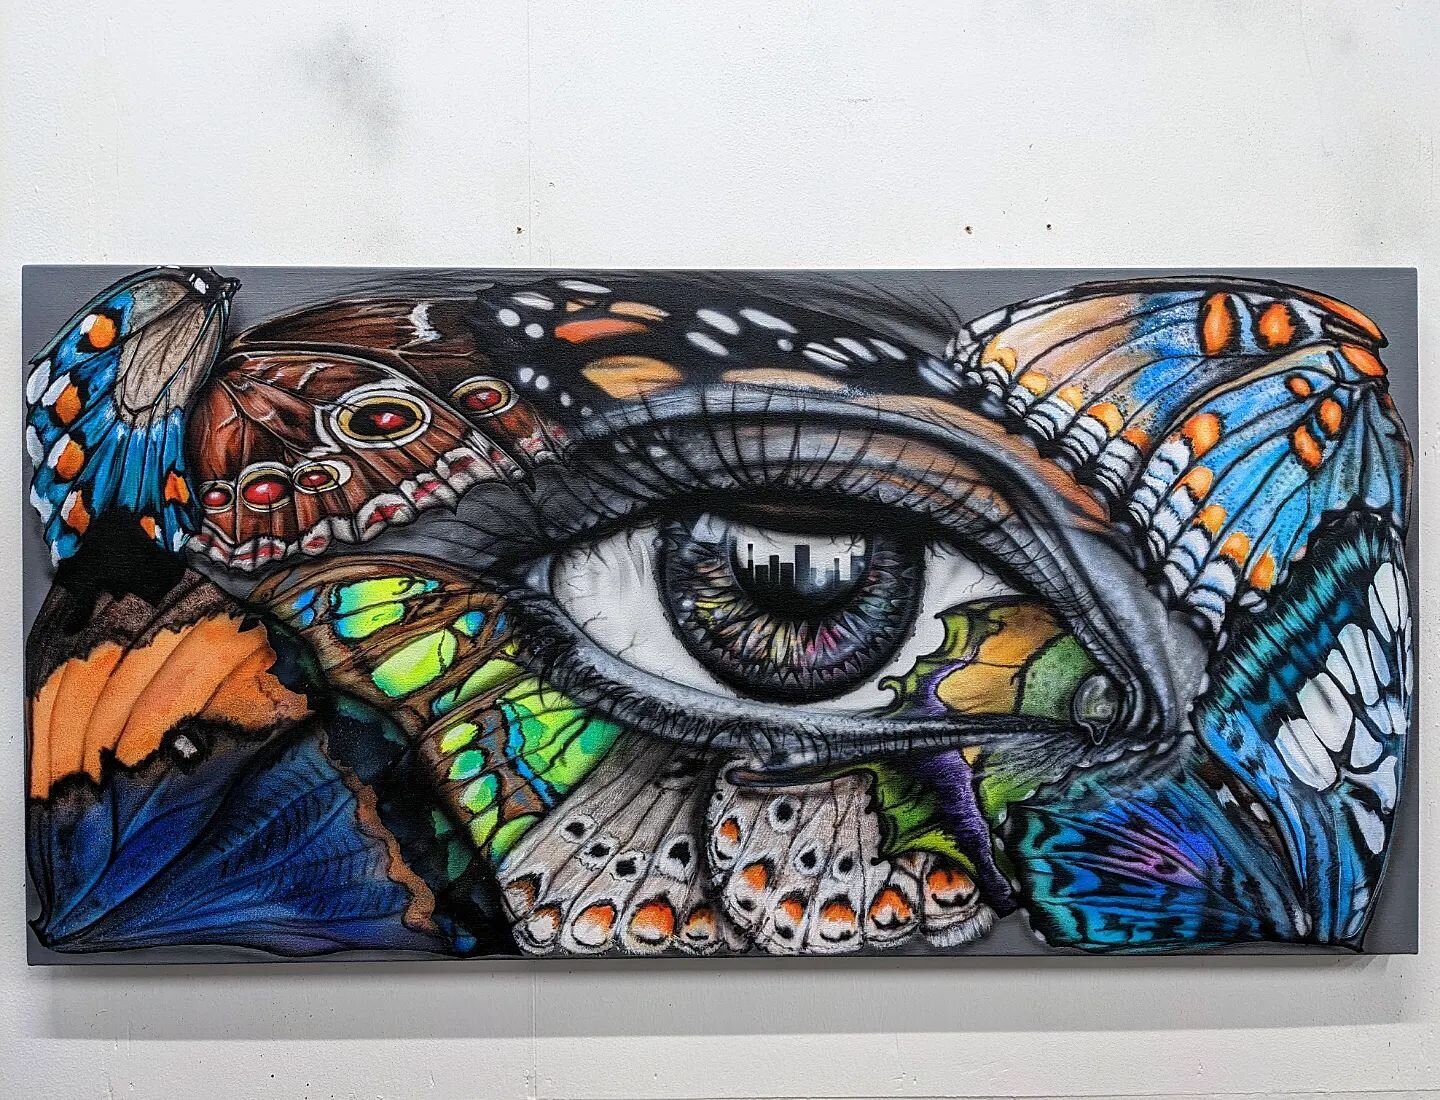 &quot;Endangered sighting&quot;
Mediums: Acrylic, spray paint &amp; airbrush on canvas
24in x 48in
-
After taking some time to reflect I accepted this as a completed painting. The wings are of butterfly species that are endangered or threatened by cl